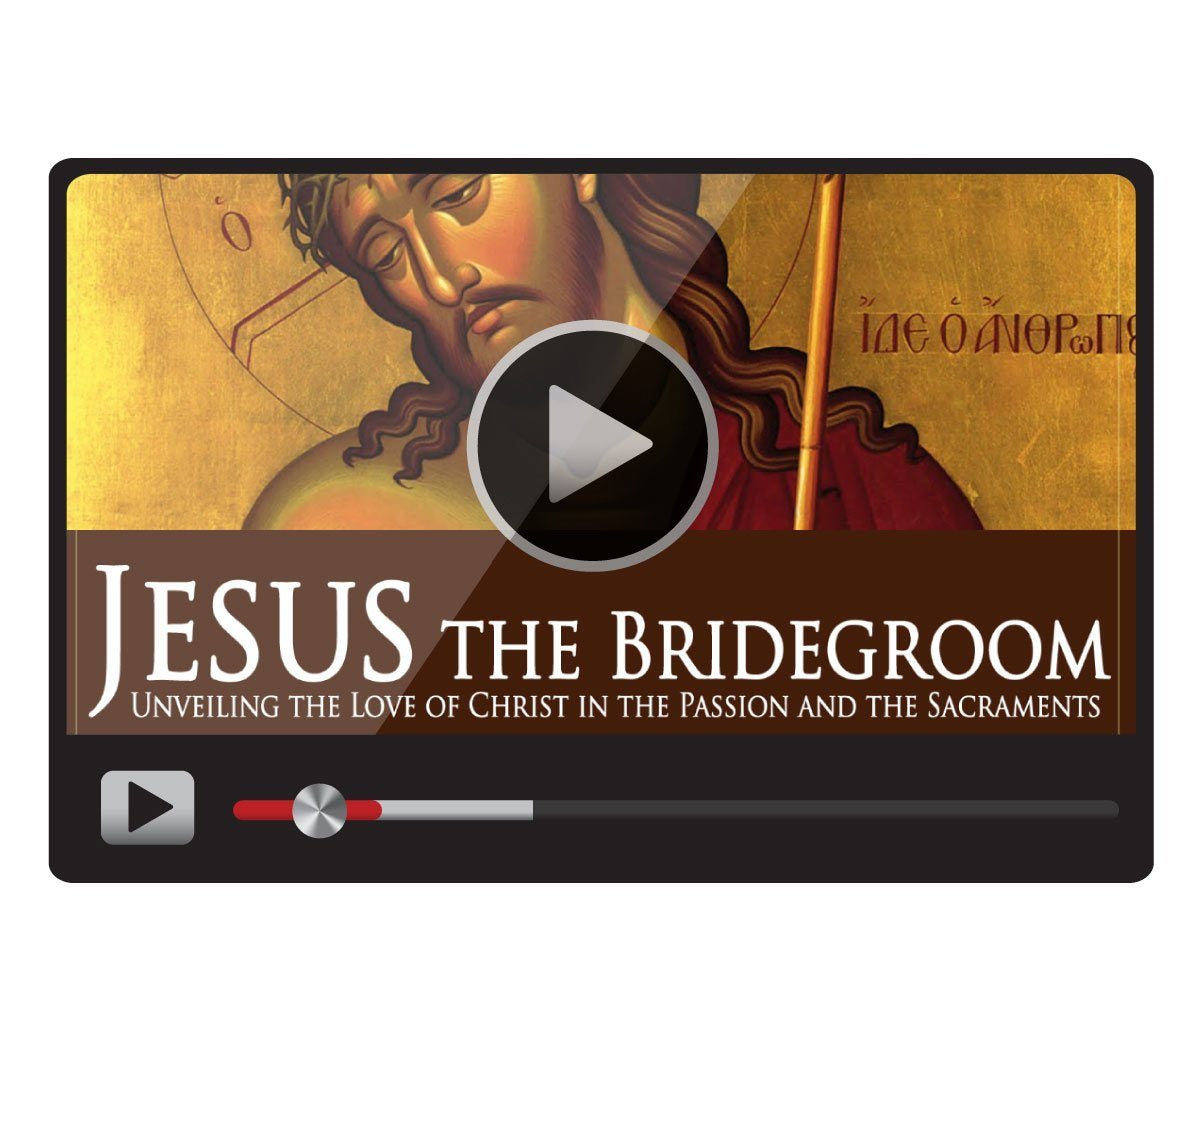 Dr. Brant Pitre discusses Jesus as the Bridegroom of the New Israel, the Church, in this Bible study on CD.